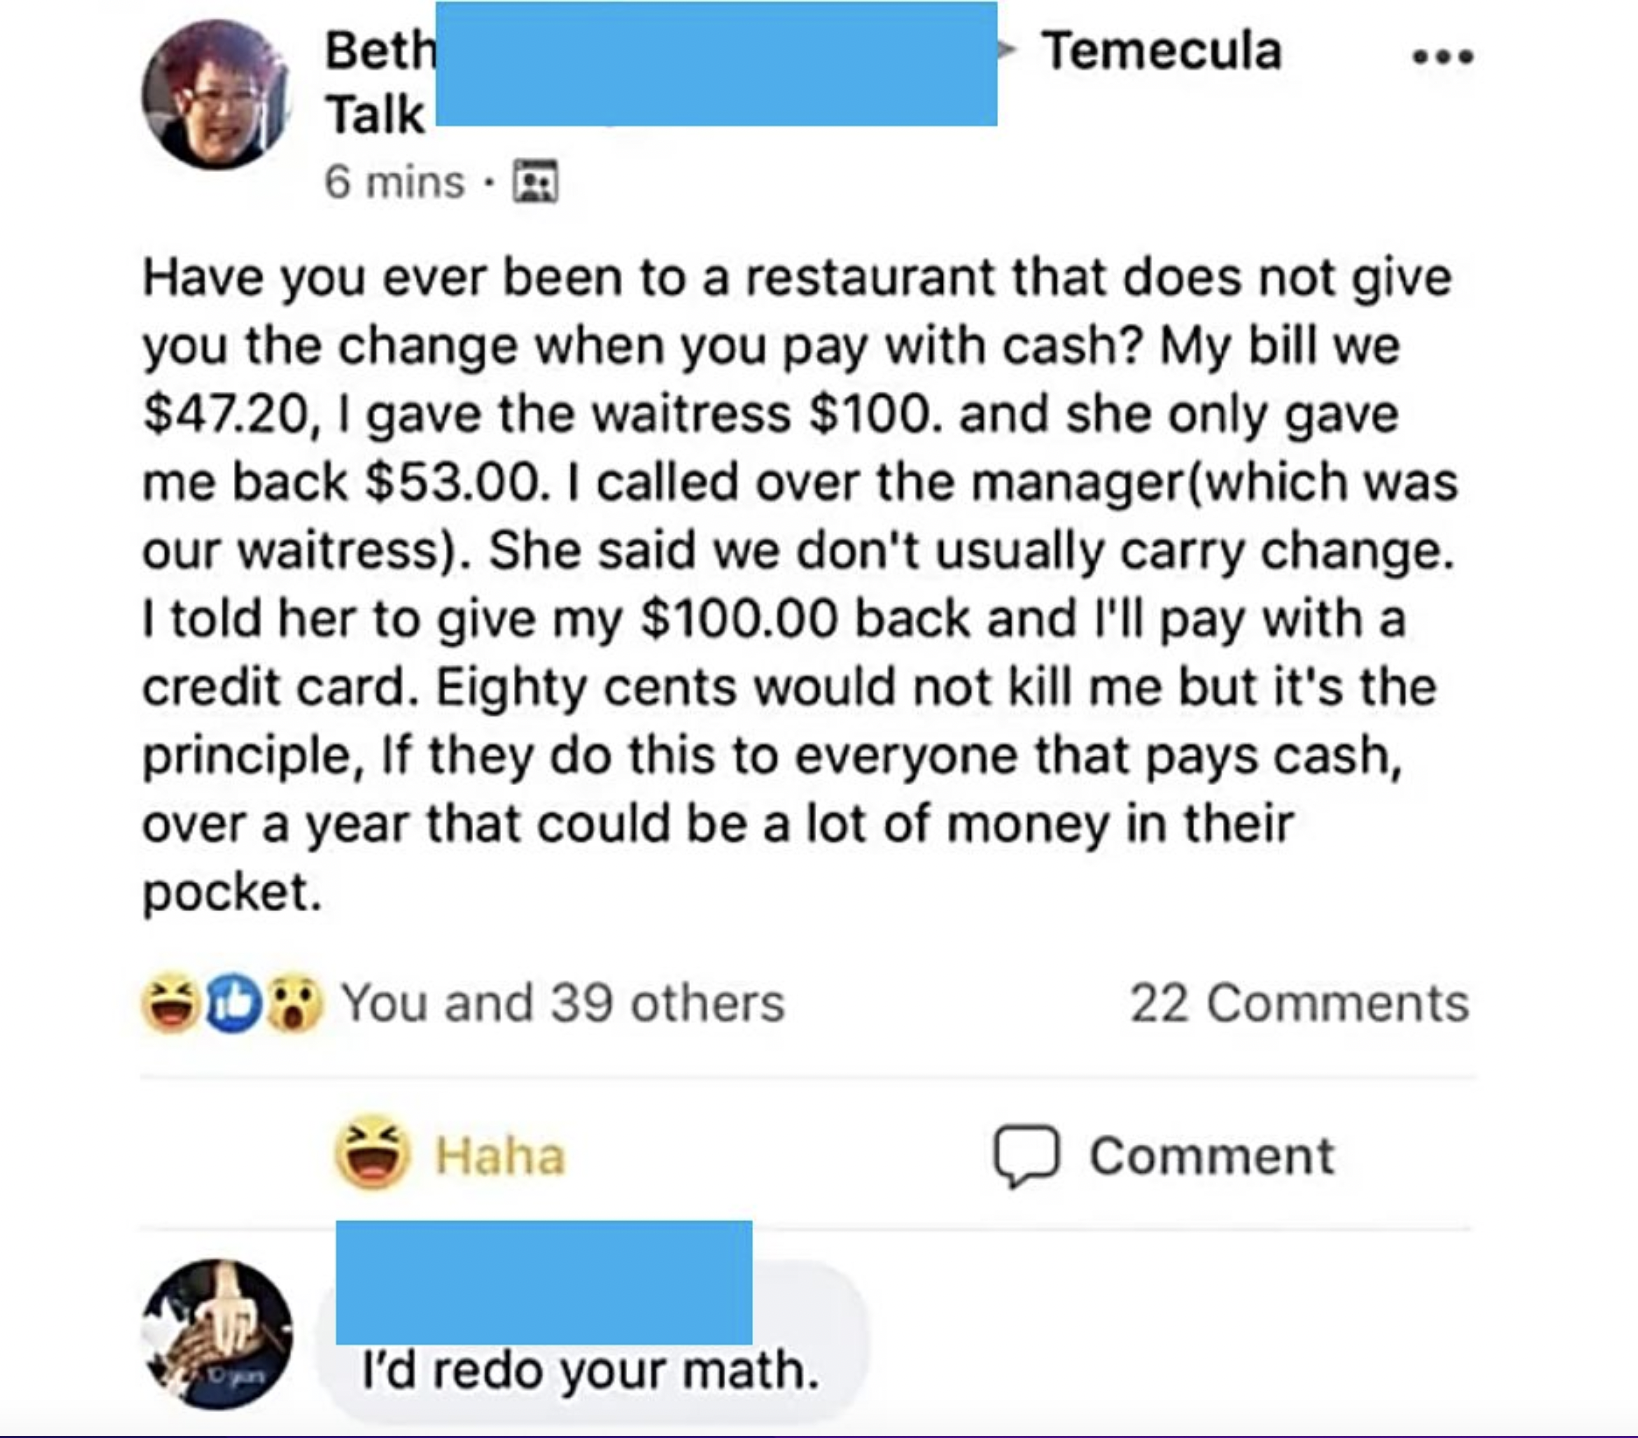 Facepalms - insane people on facebook - . Have you ever been to a restaurant that does not give you the change when you pay with cash? My bill we $47.20, I gave the waitress $100. and she only gave me back $53.00. I called over the manager which was o